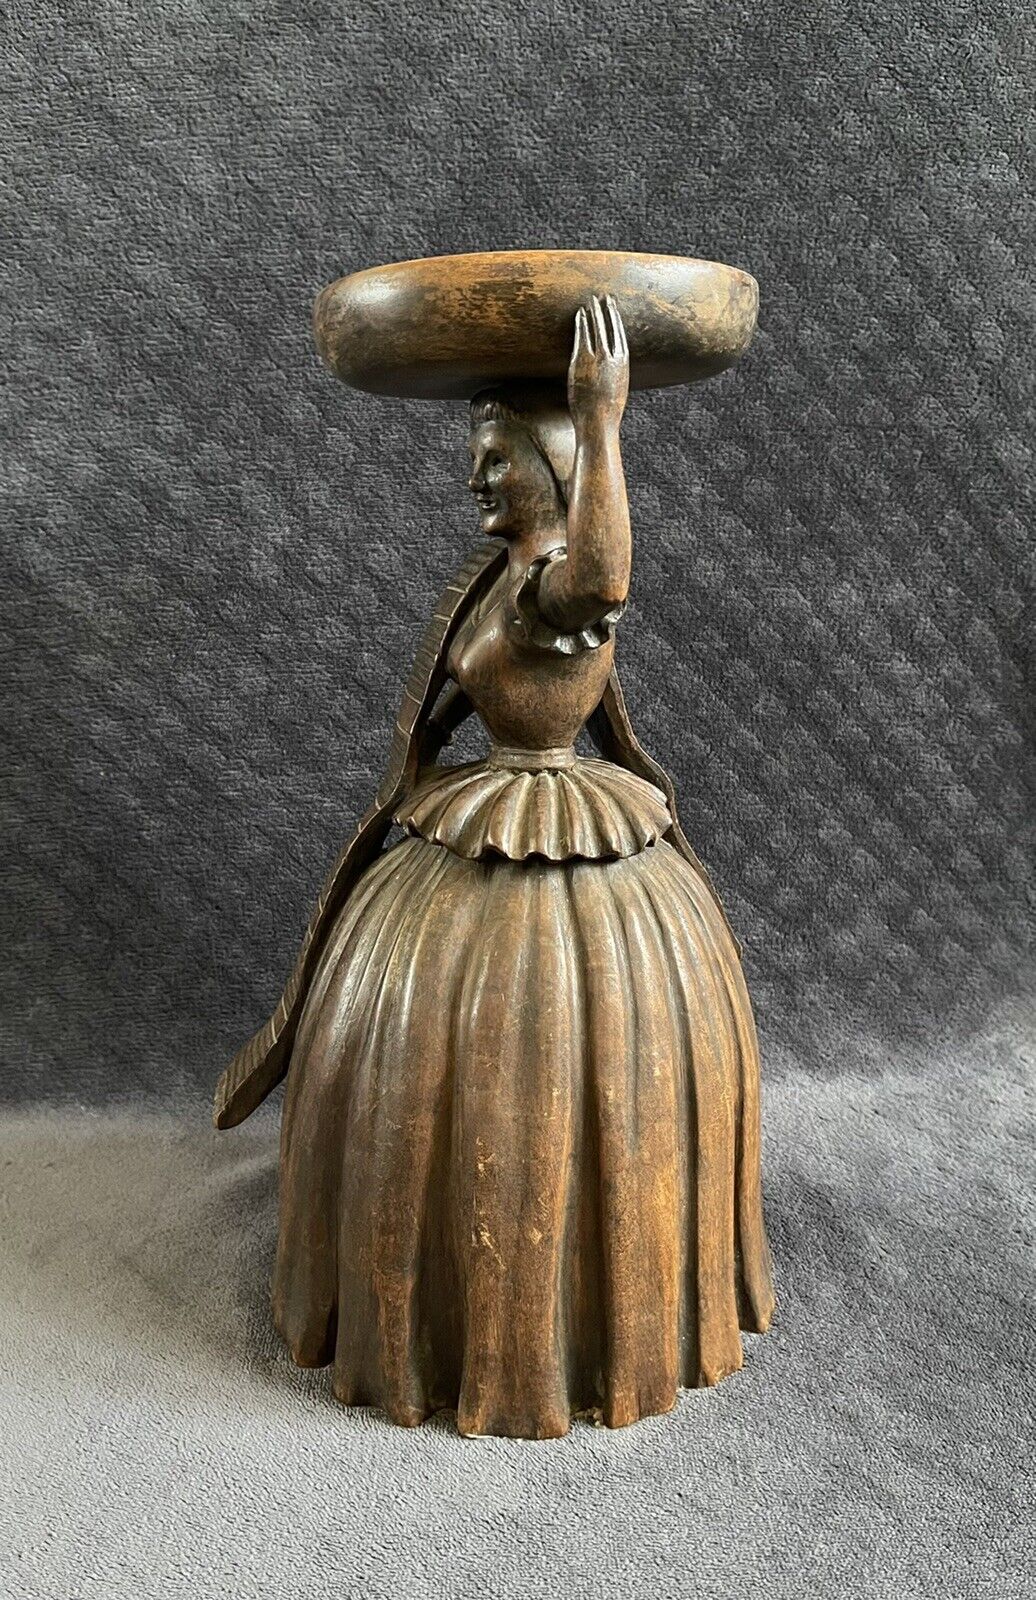 Vintage Souza Rio Brazil Folk Art Hand Carved Wooden Woman Ashtray or Catchall